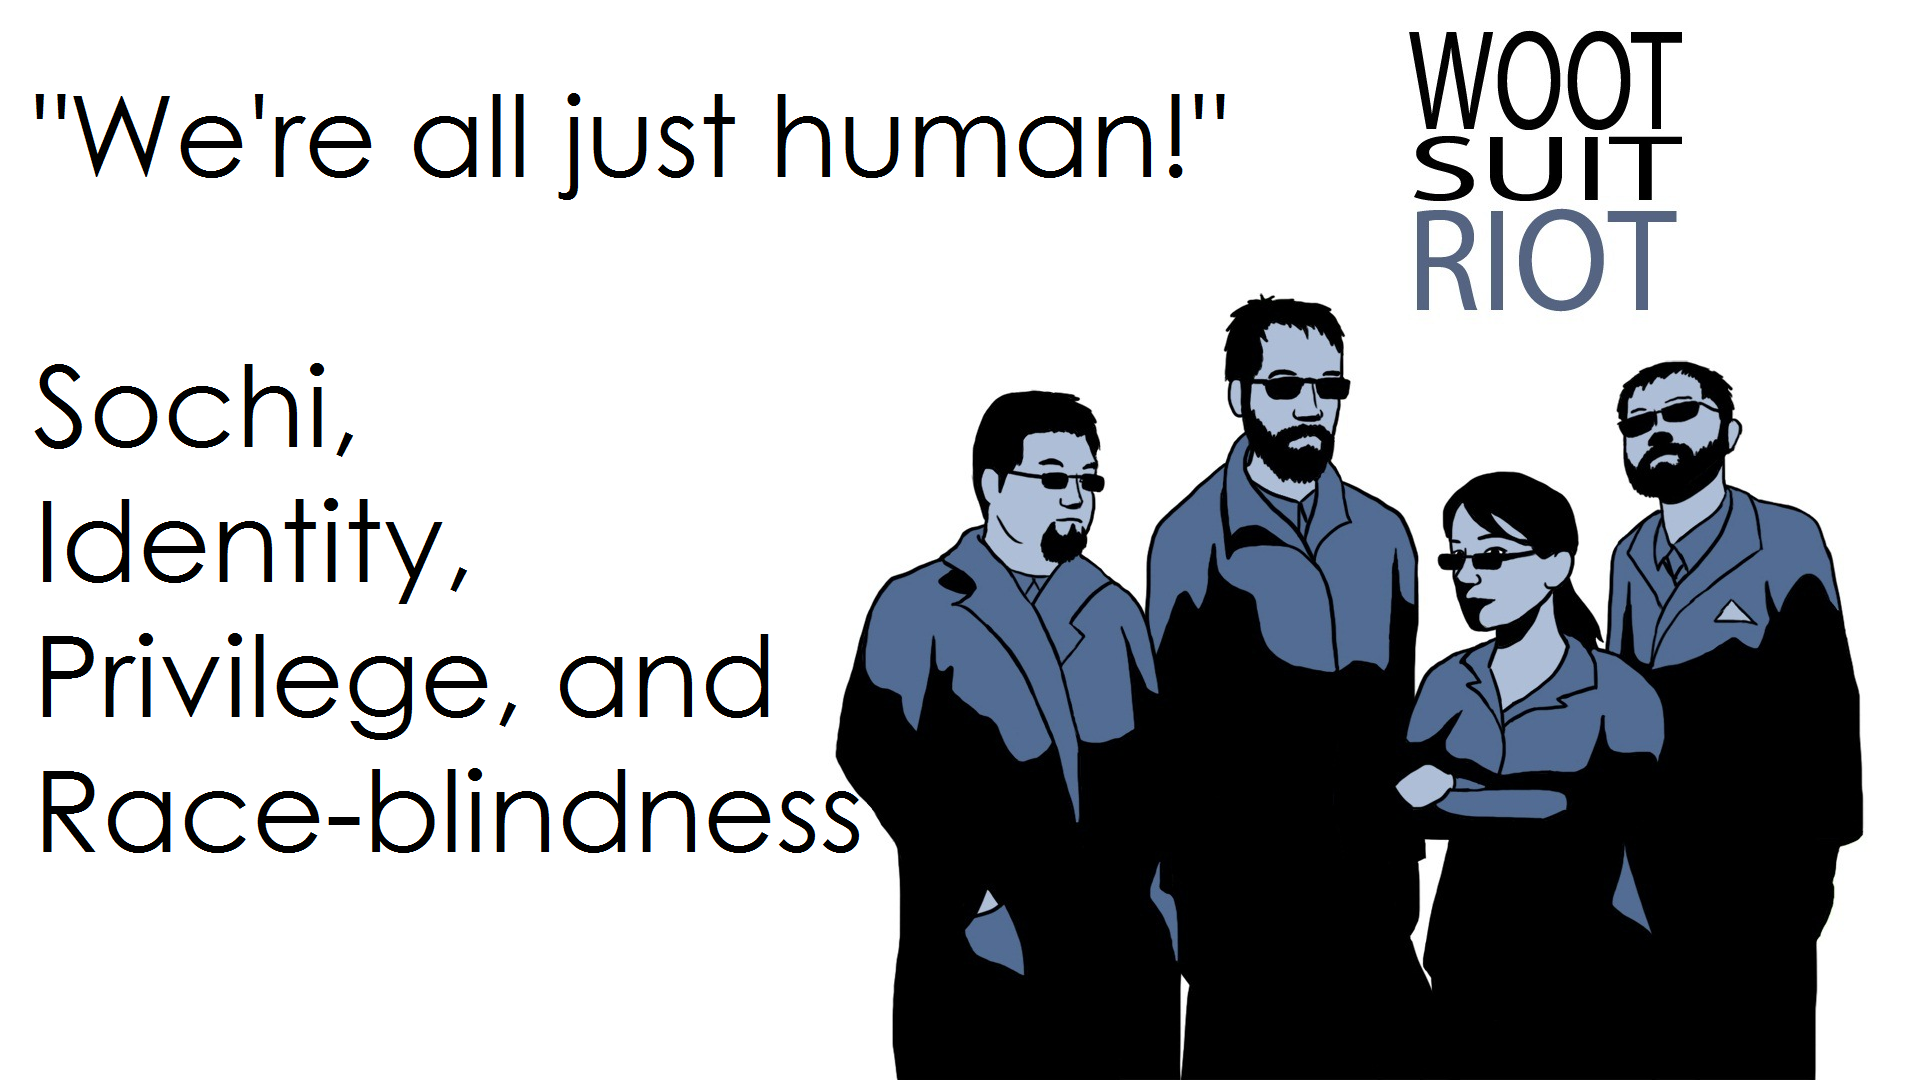 “We’re all just human!”